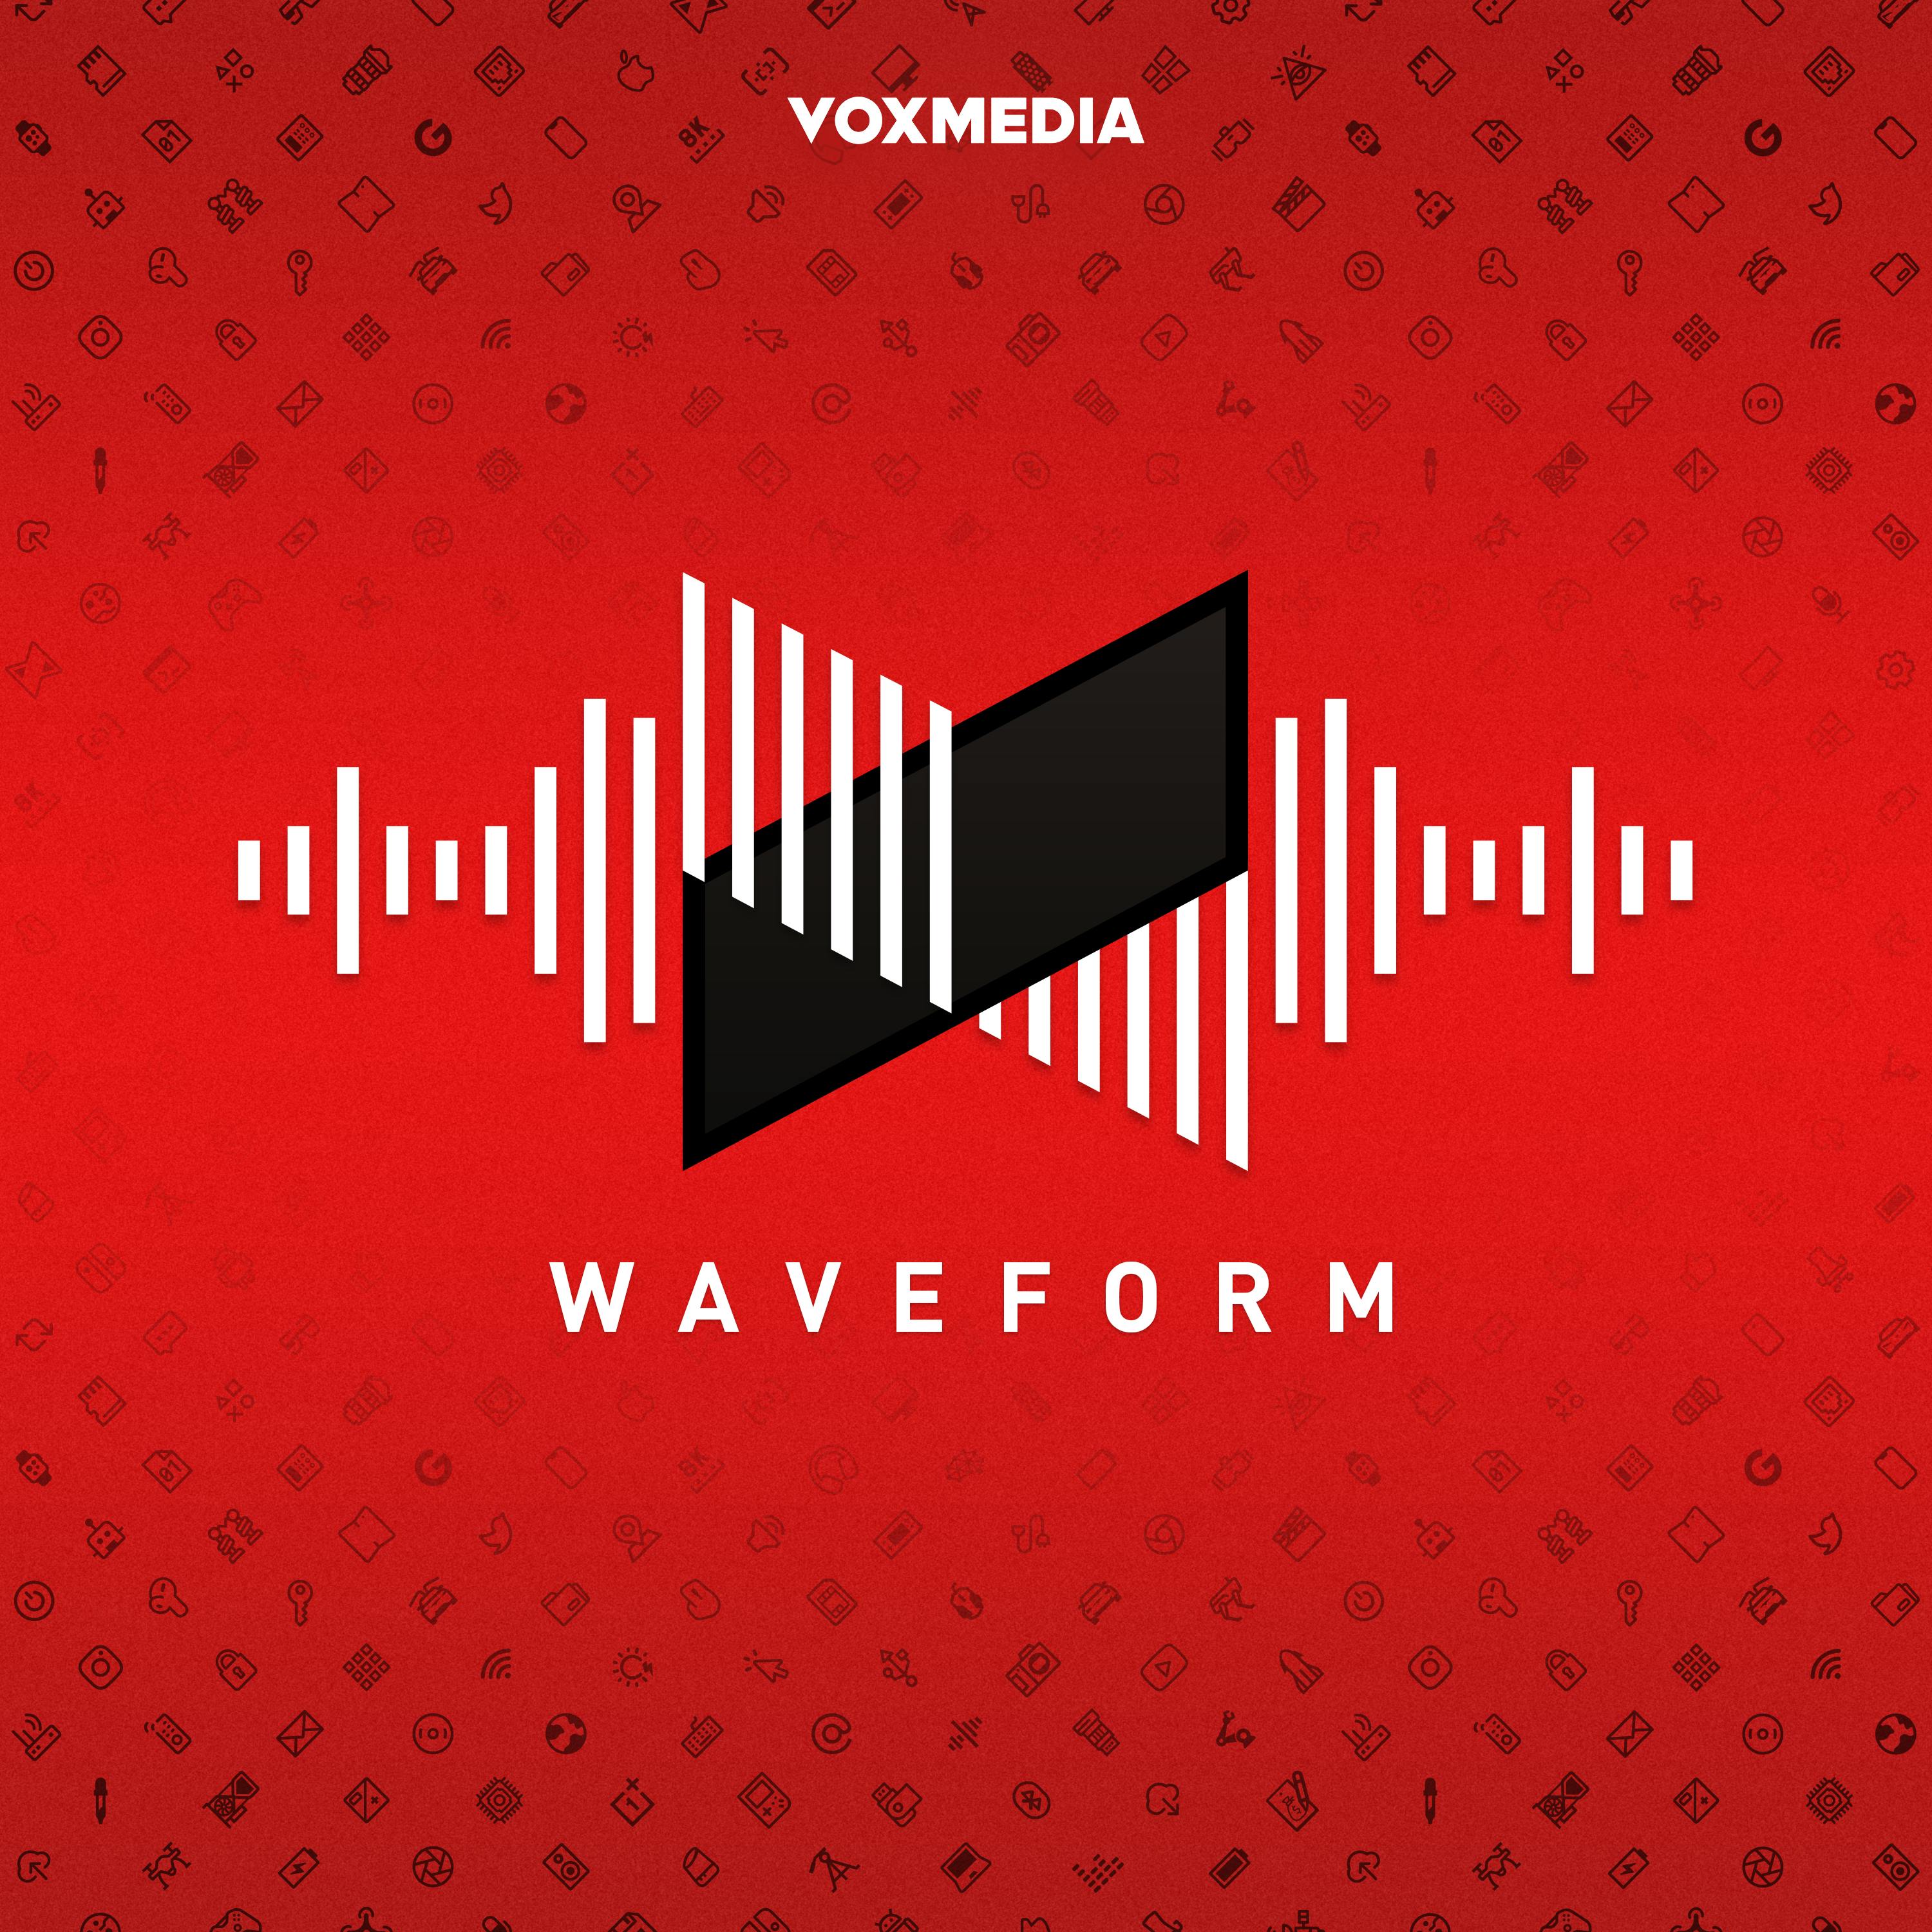 Waveform: The MKBHD Podcast podcast